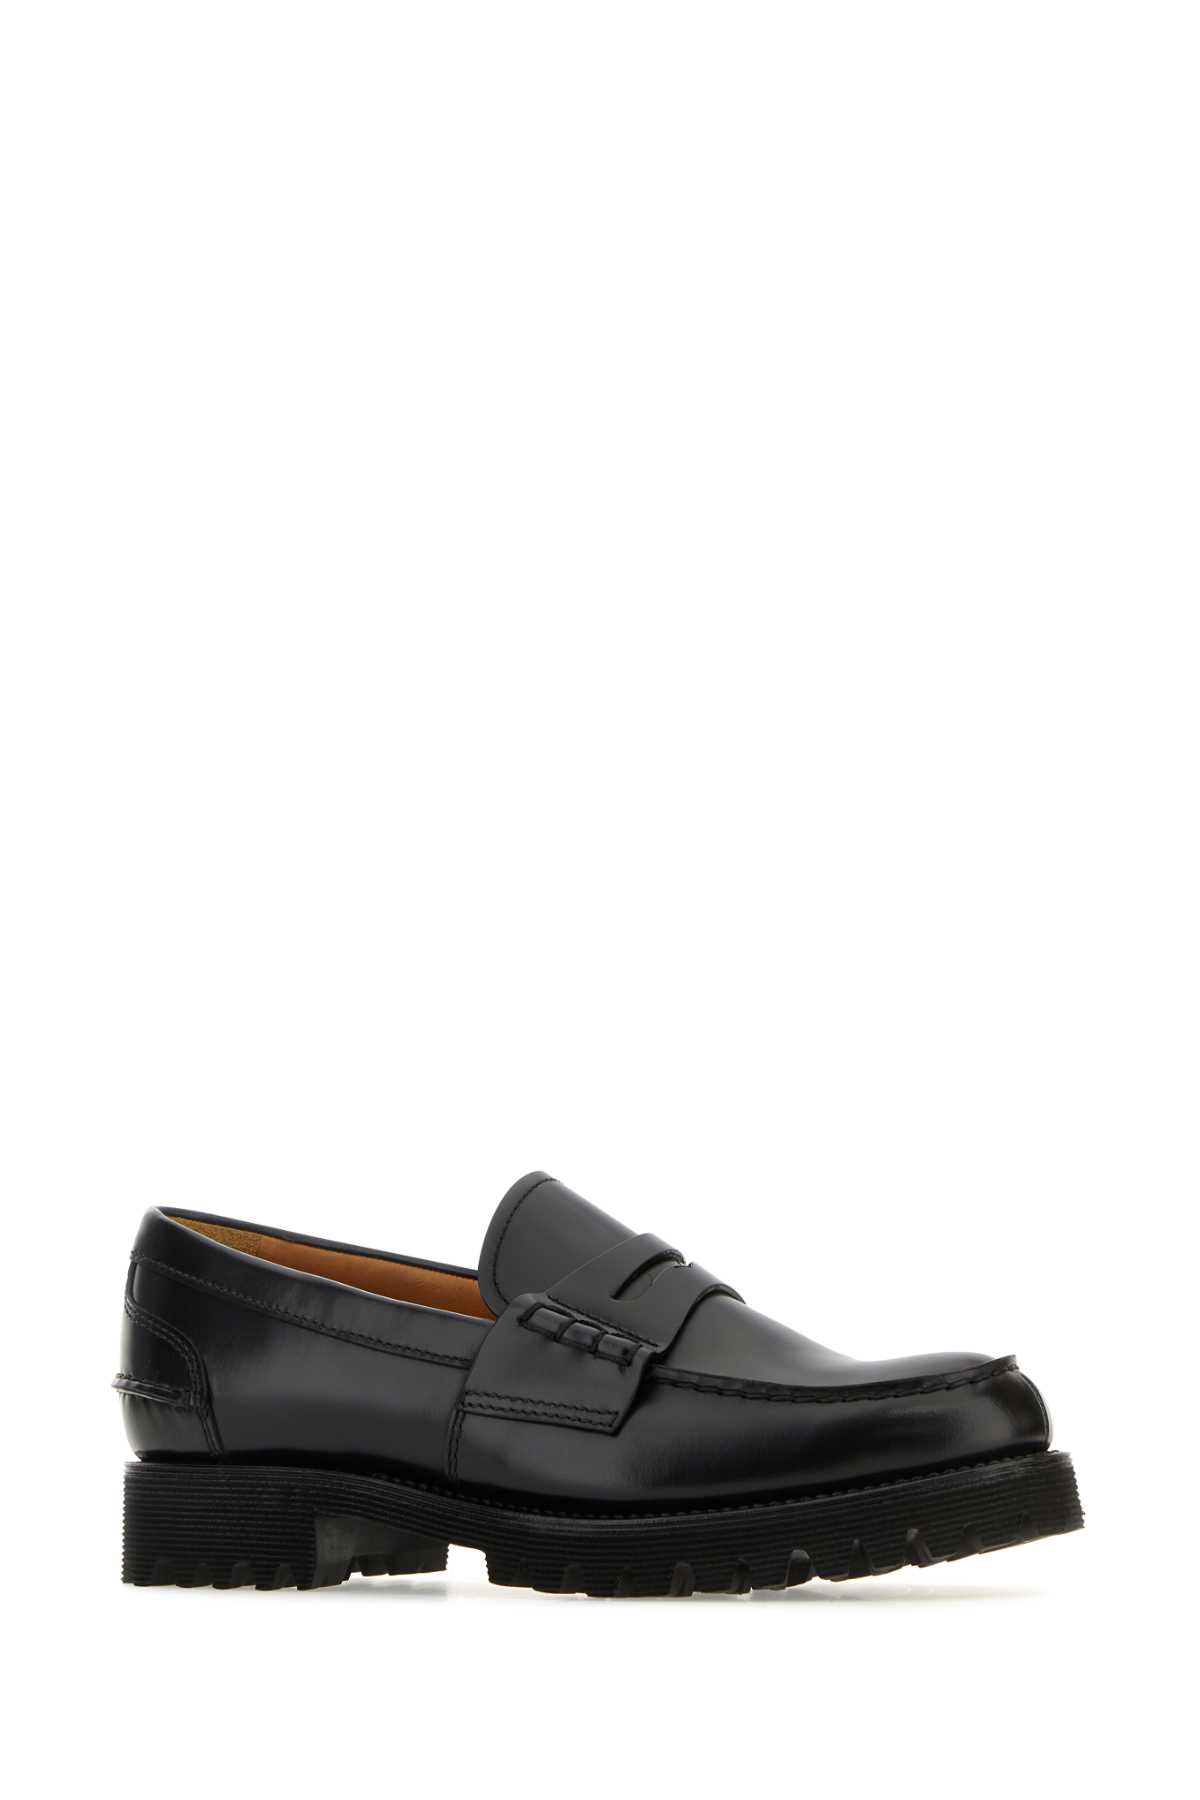 Church's Black Leather Pembrey Loafers